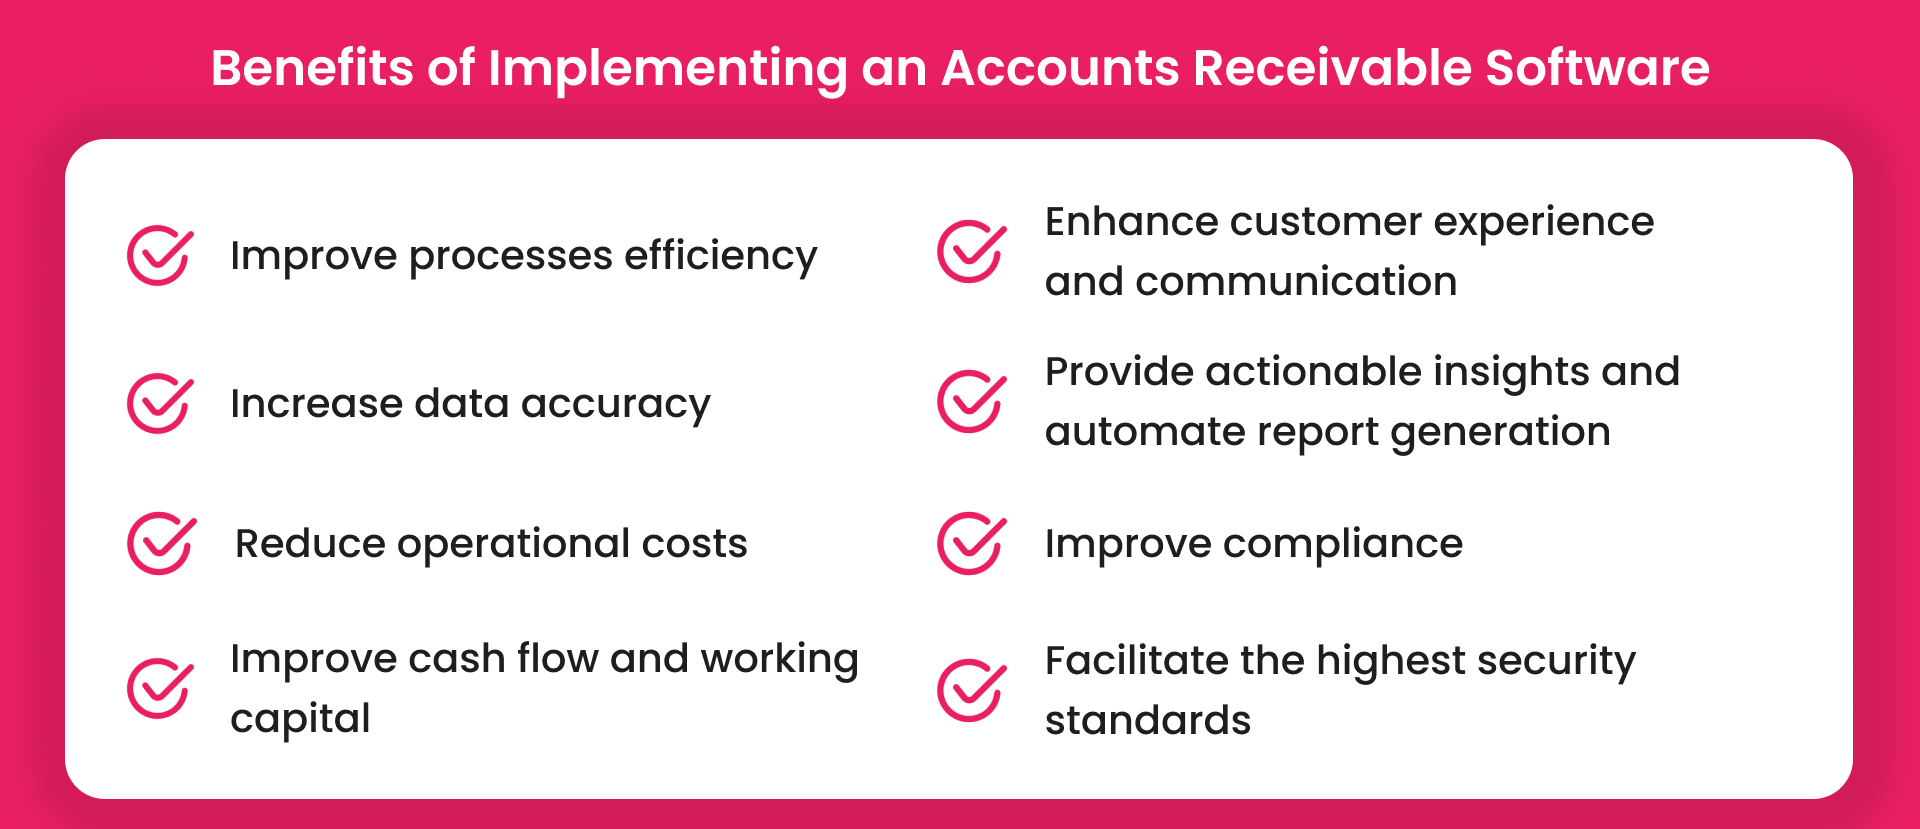 Benefits of Implementing an Accounts Receivable Software